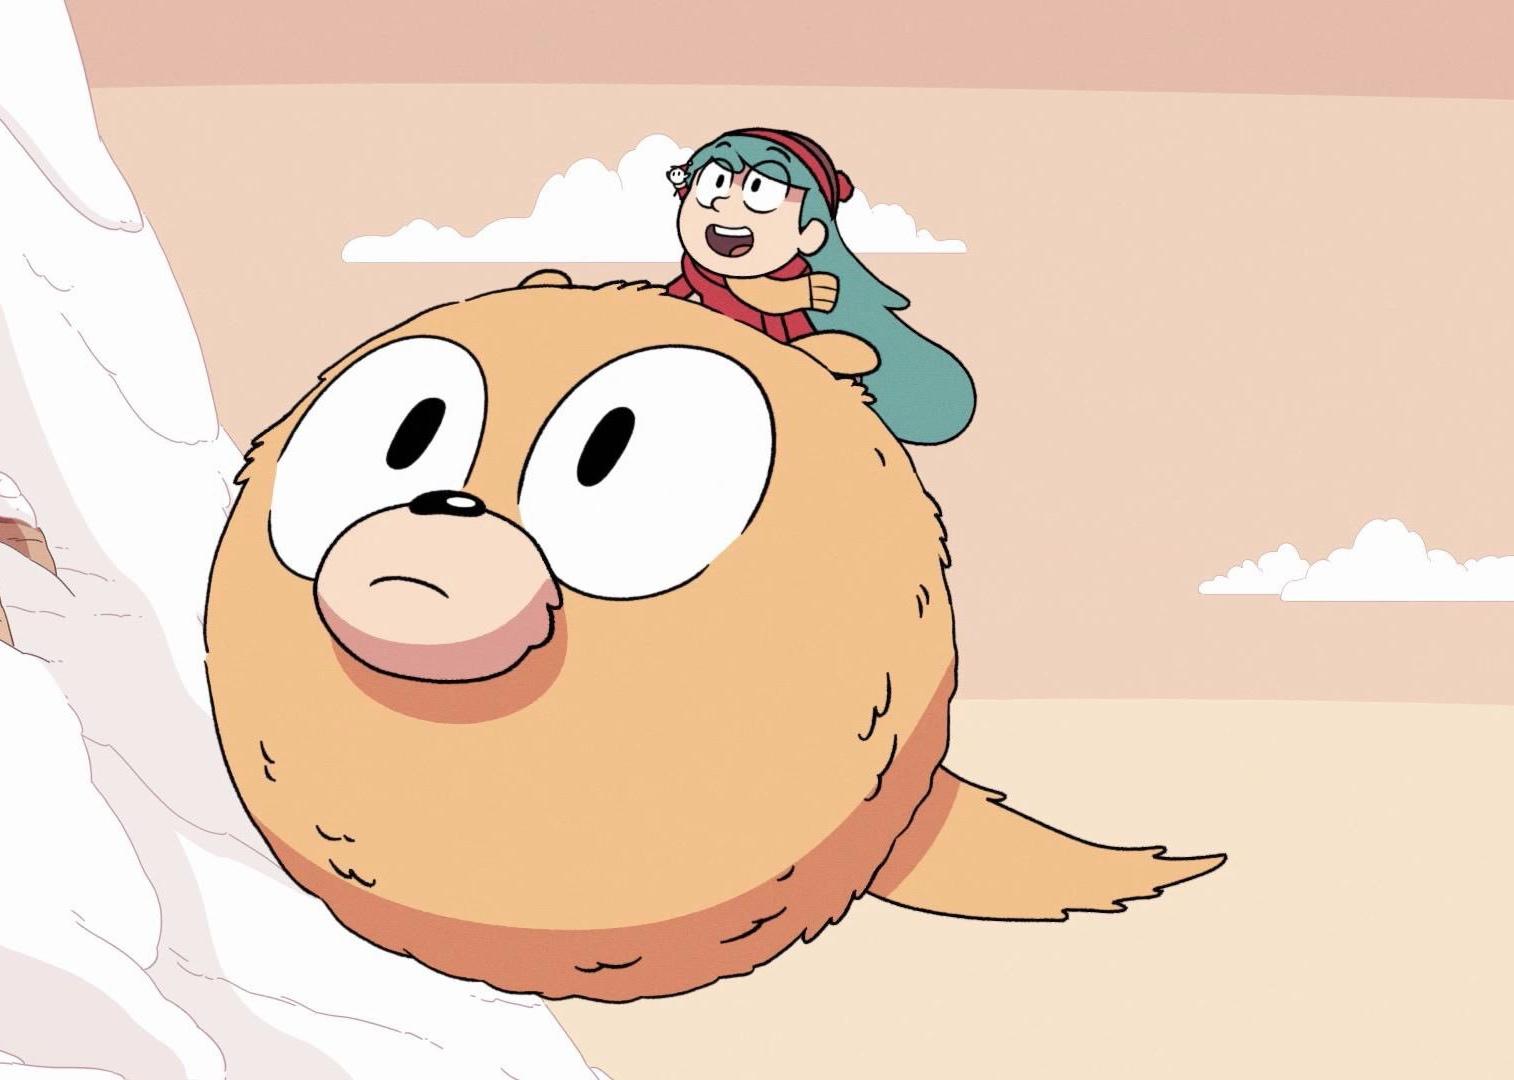 A cartoon of a girl flying on the back of a furry ball character.